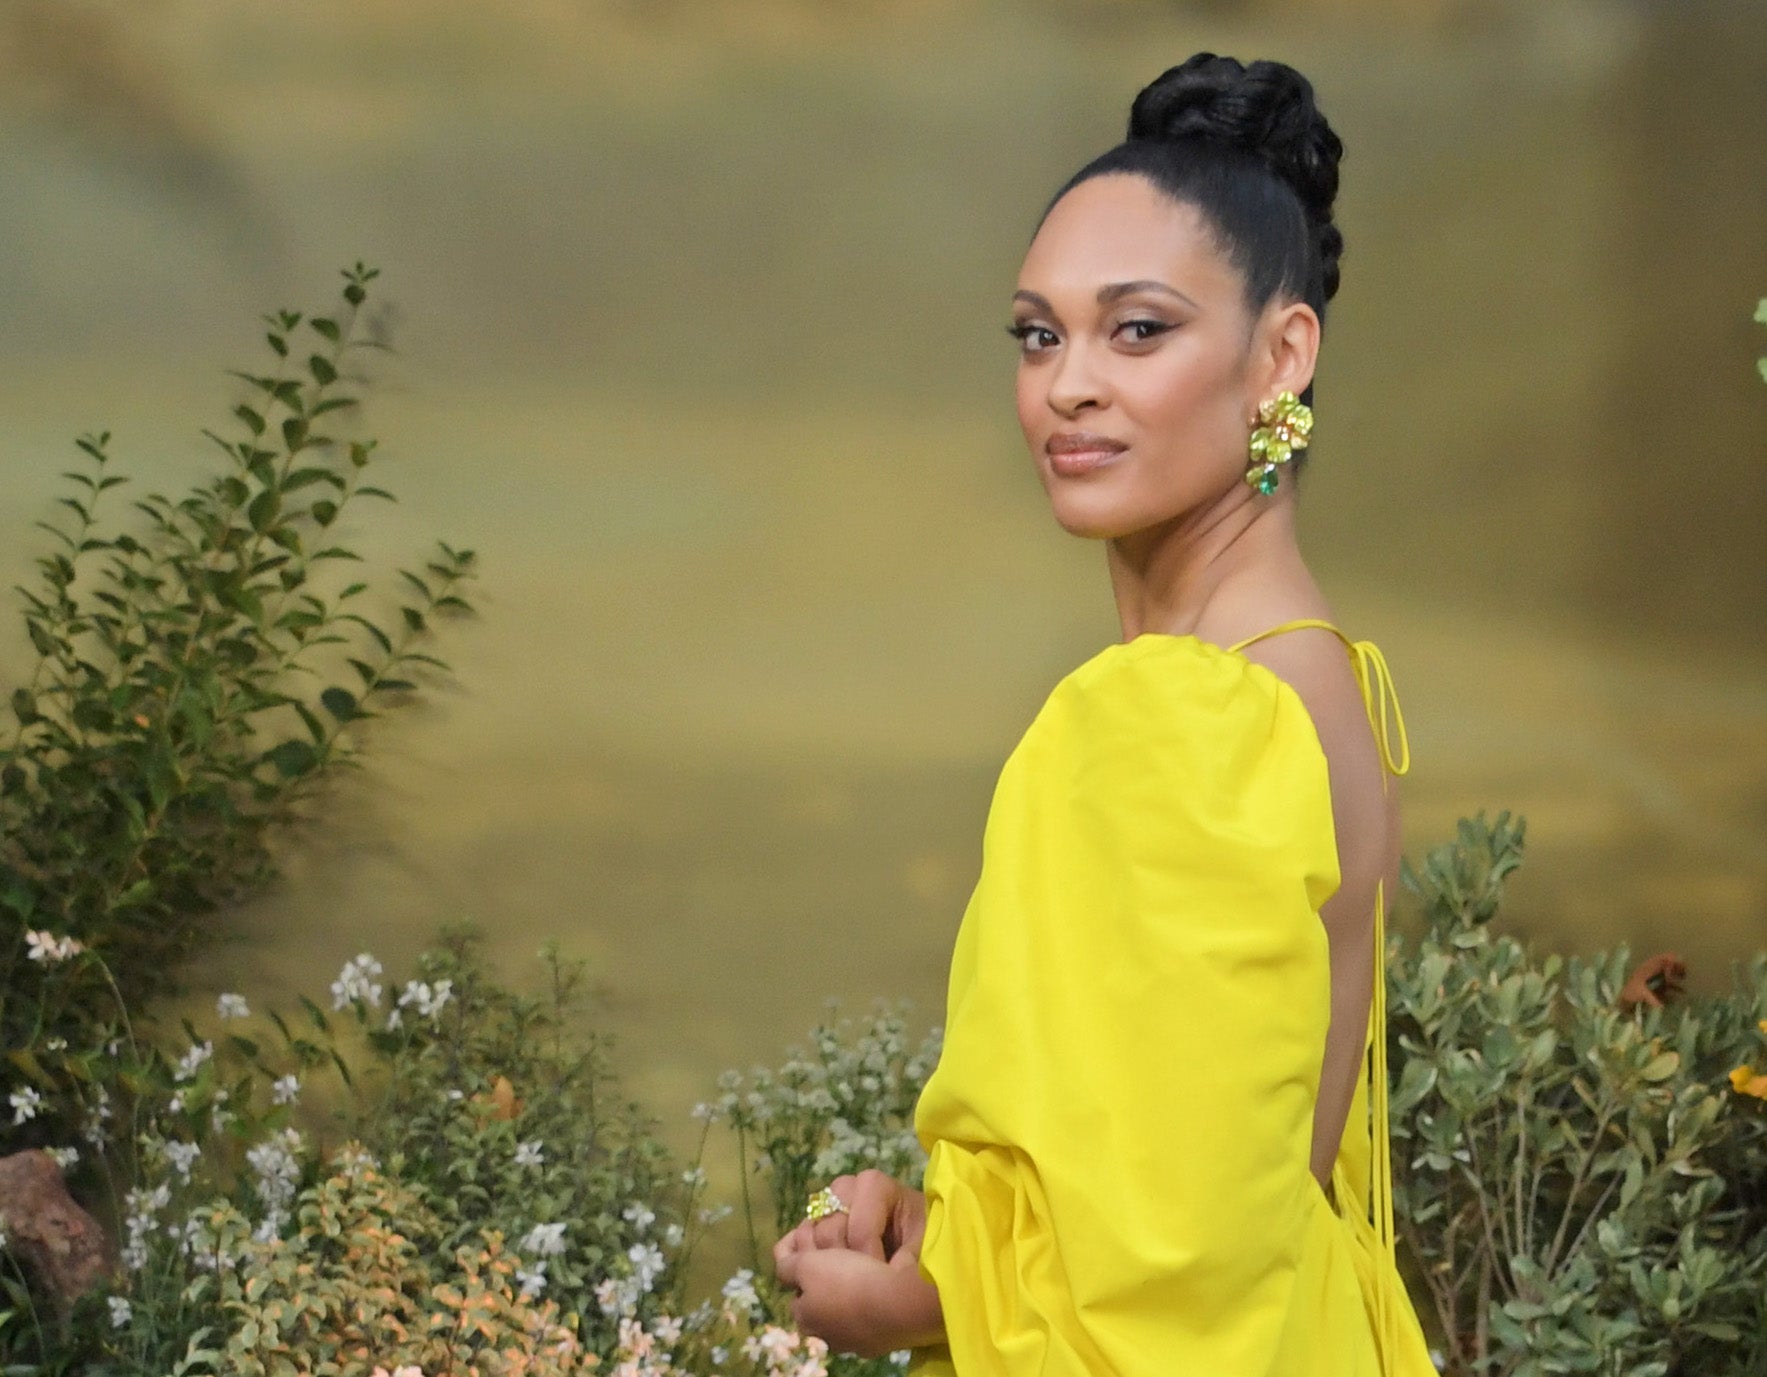 ‘Rings of Power’ Actress Cynthia Addai Robinson Won’t Engage In Negative Conversations Around Diversity In Fantasy Series